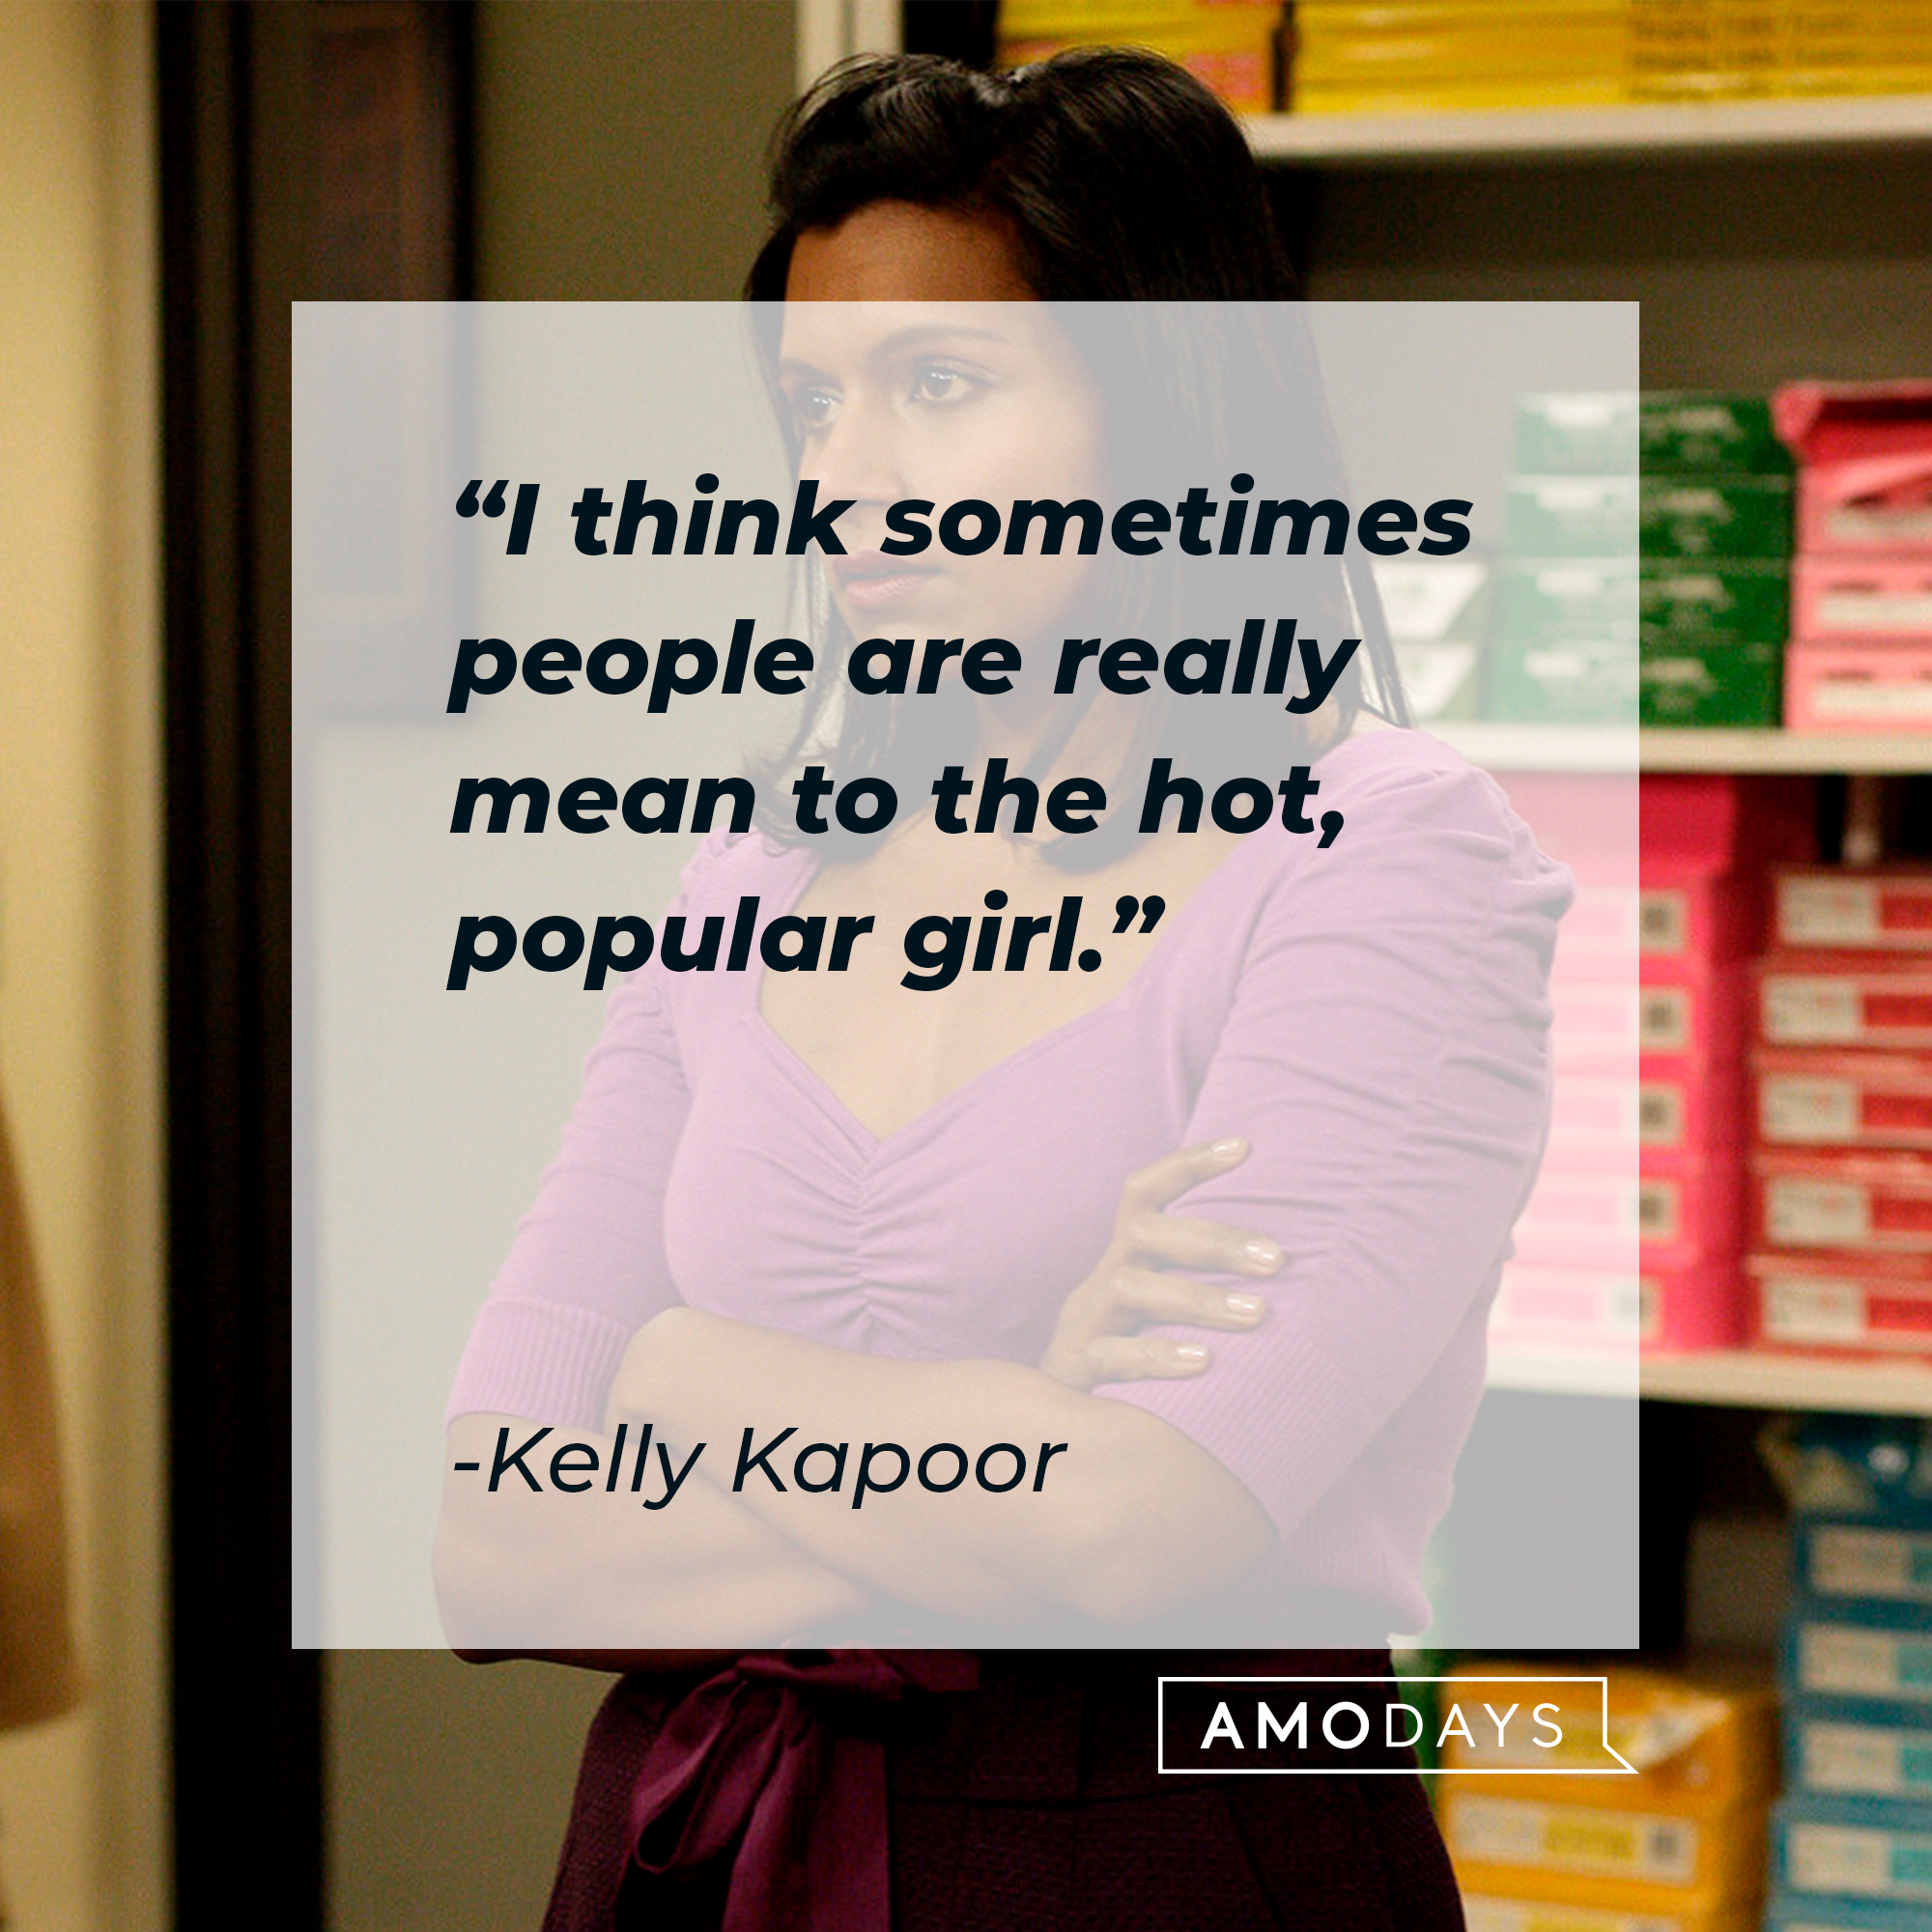 Kelly Kapoor's quote: "I think sometimes people are really mean to the hot, popular girl." | Source: facebook.com/TheOfficeTV